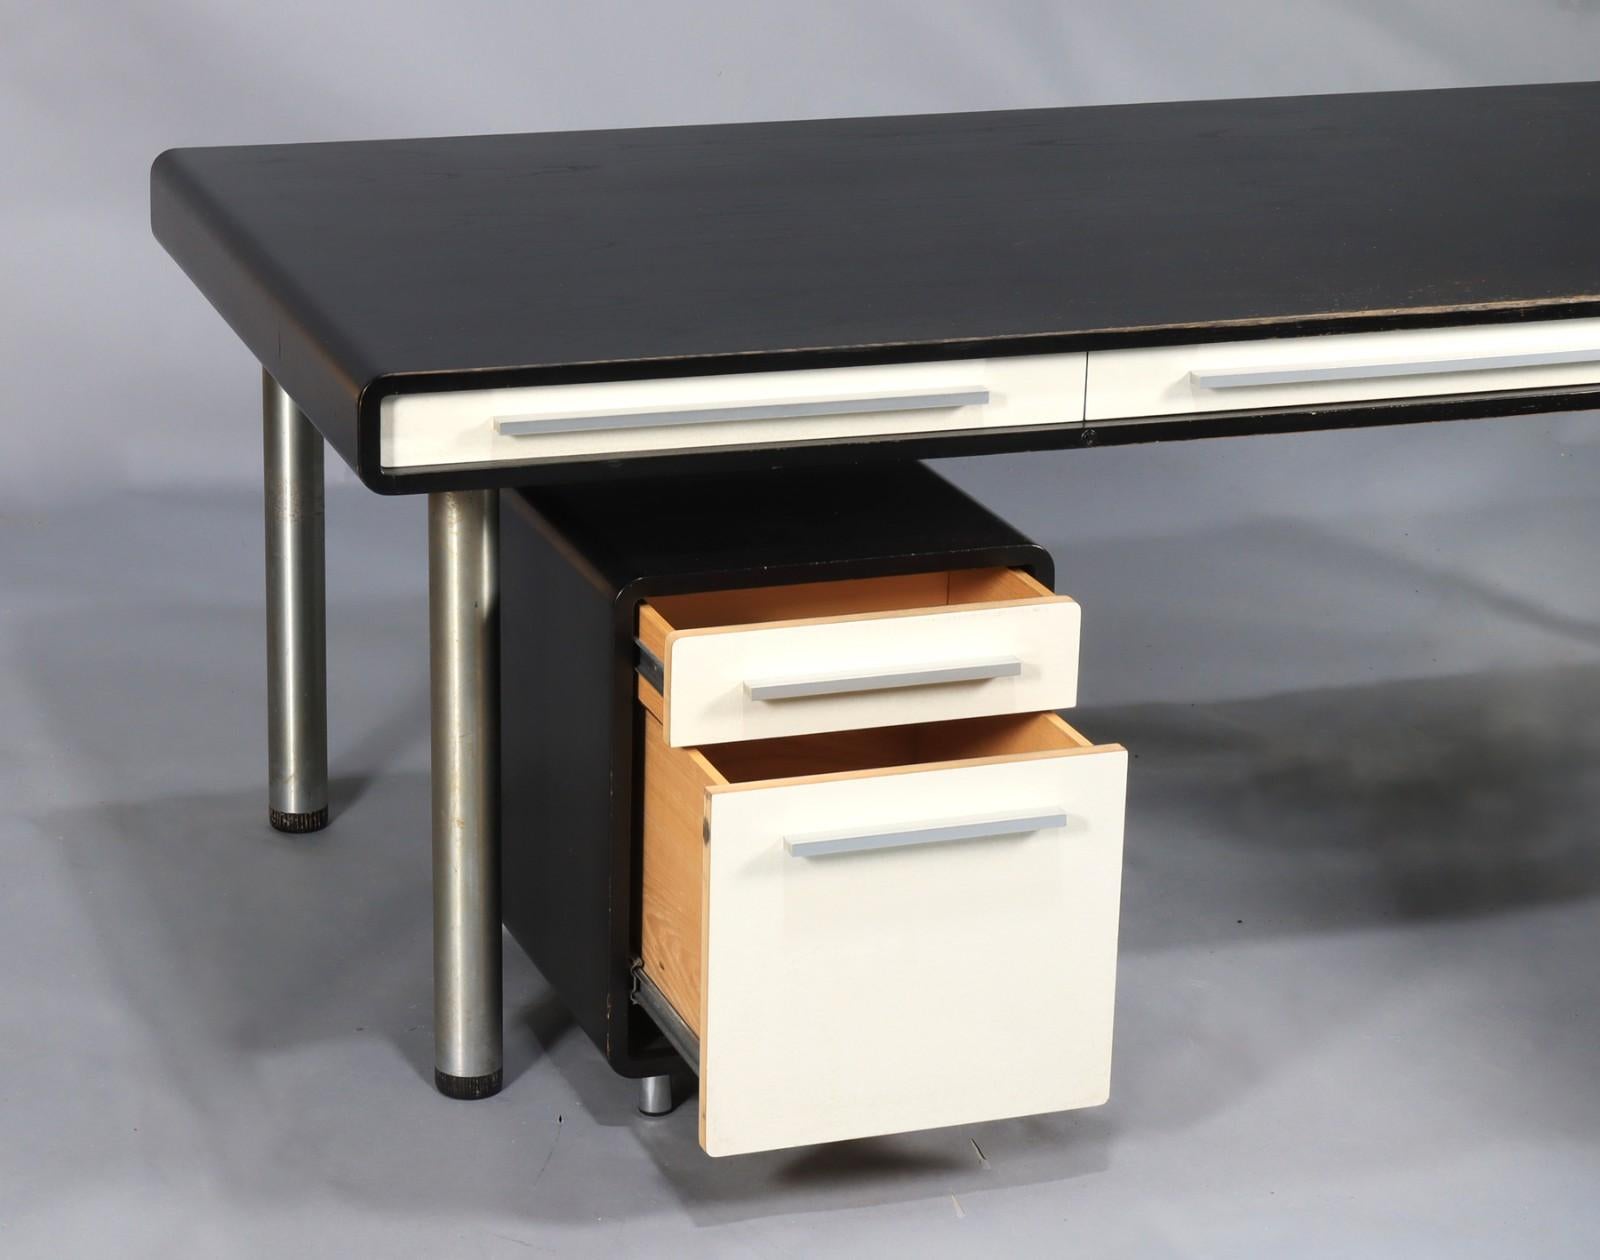 Dyrlund. Desk, model 'Space' with side table and drawer module in lacquered wood, handle and legs in steel. Desk D. 95 cm, L. 200 cm, H. 73 cm, side table H. 61 cm, W. 120 cm, D. 40 cm, drawer module H. 54 cm, W. 42 cm, D. 60 cm. Manufactured by